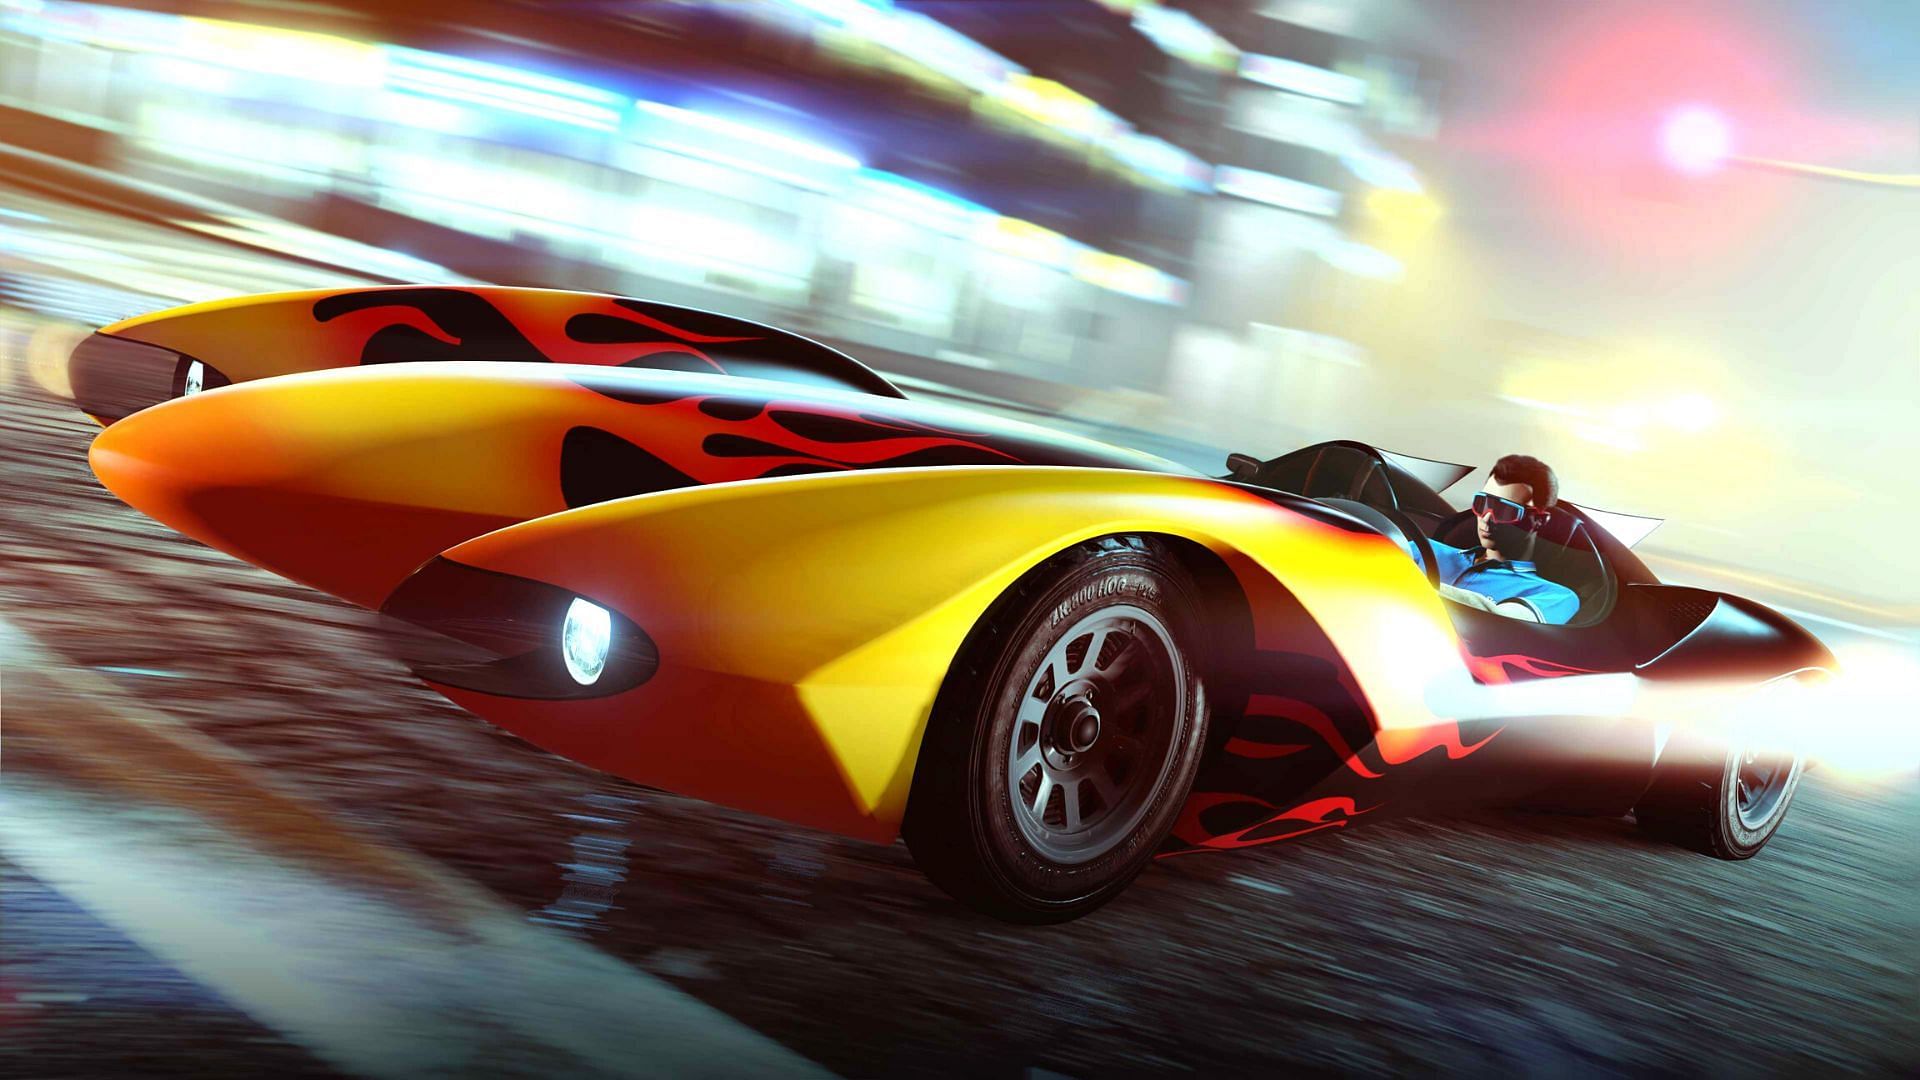 Scramjet and its perks in GTA Online that players should know about (Image via Rockstar Games)